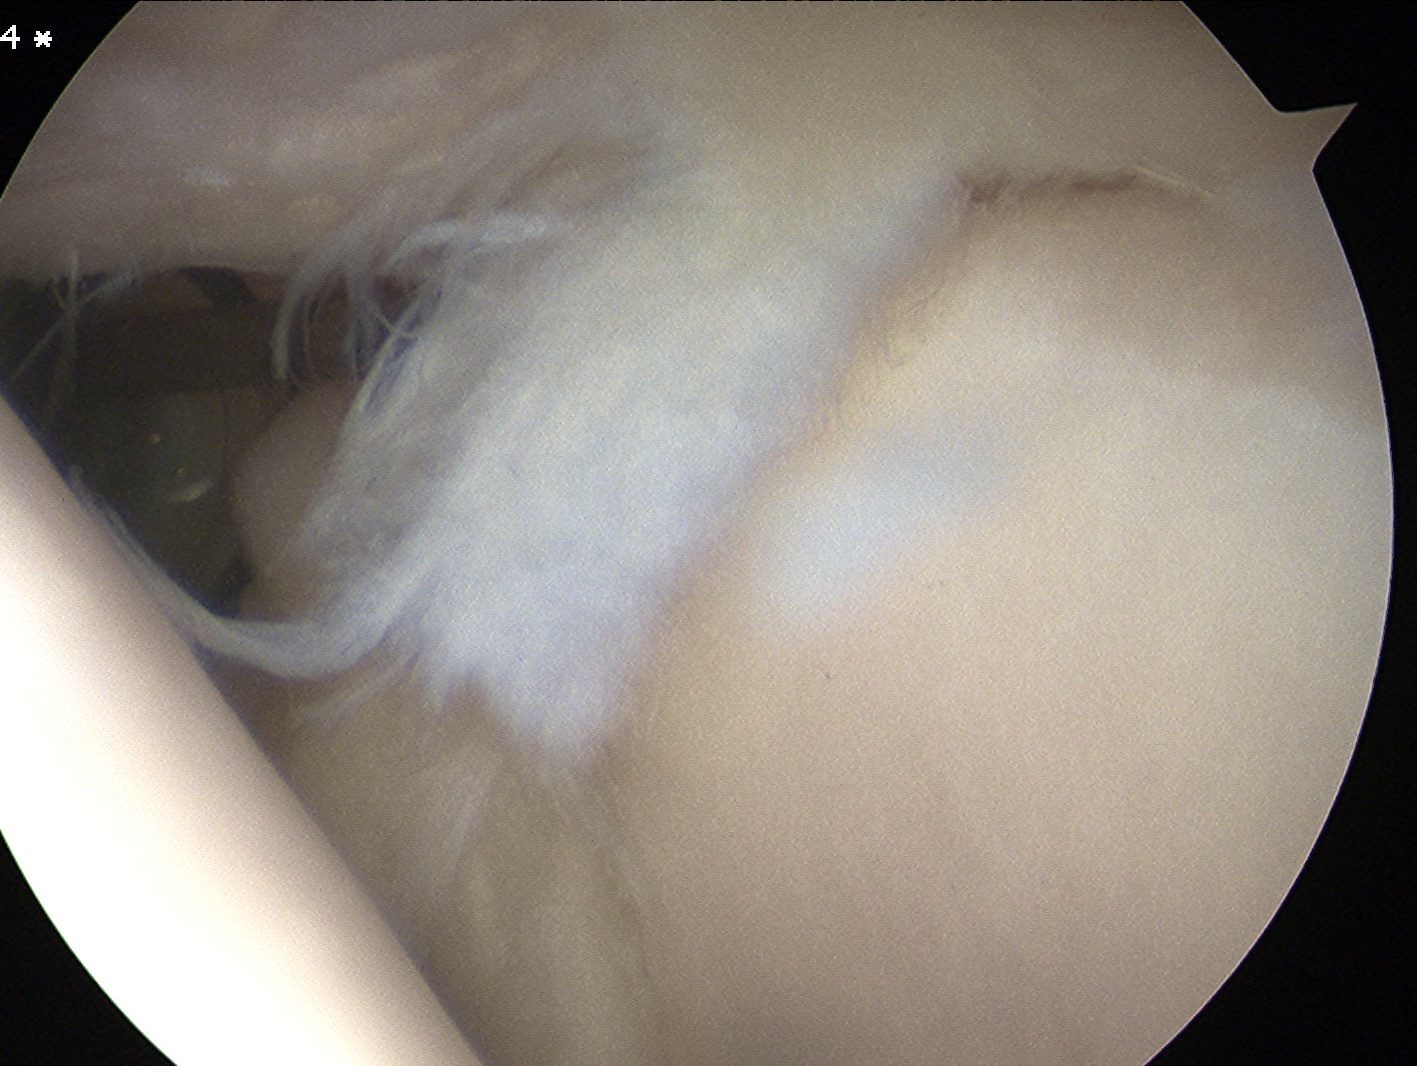 Type 4 SLAP Tear extends partially into biceps